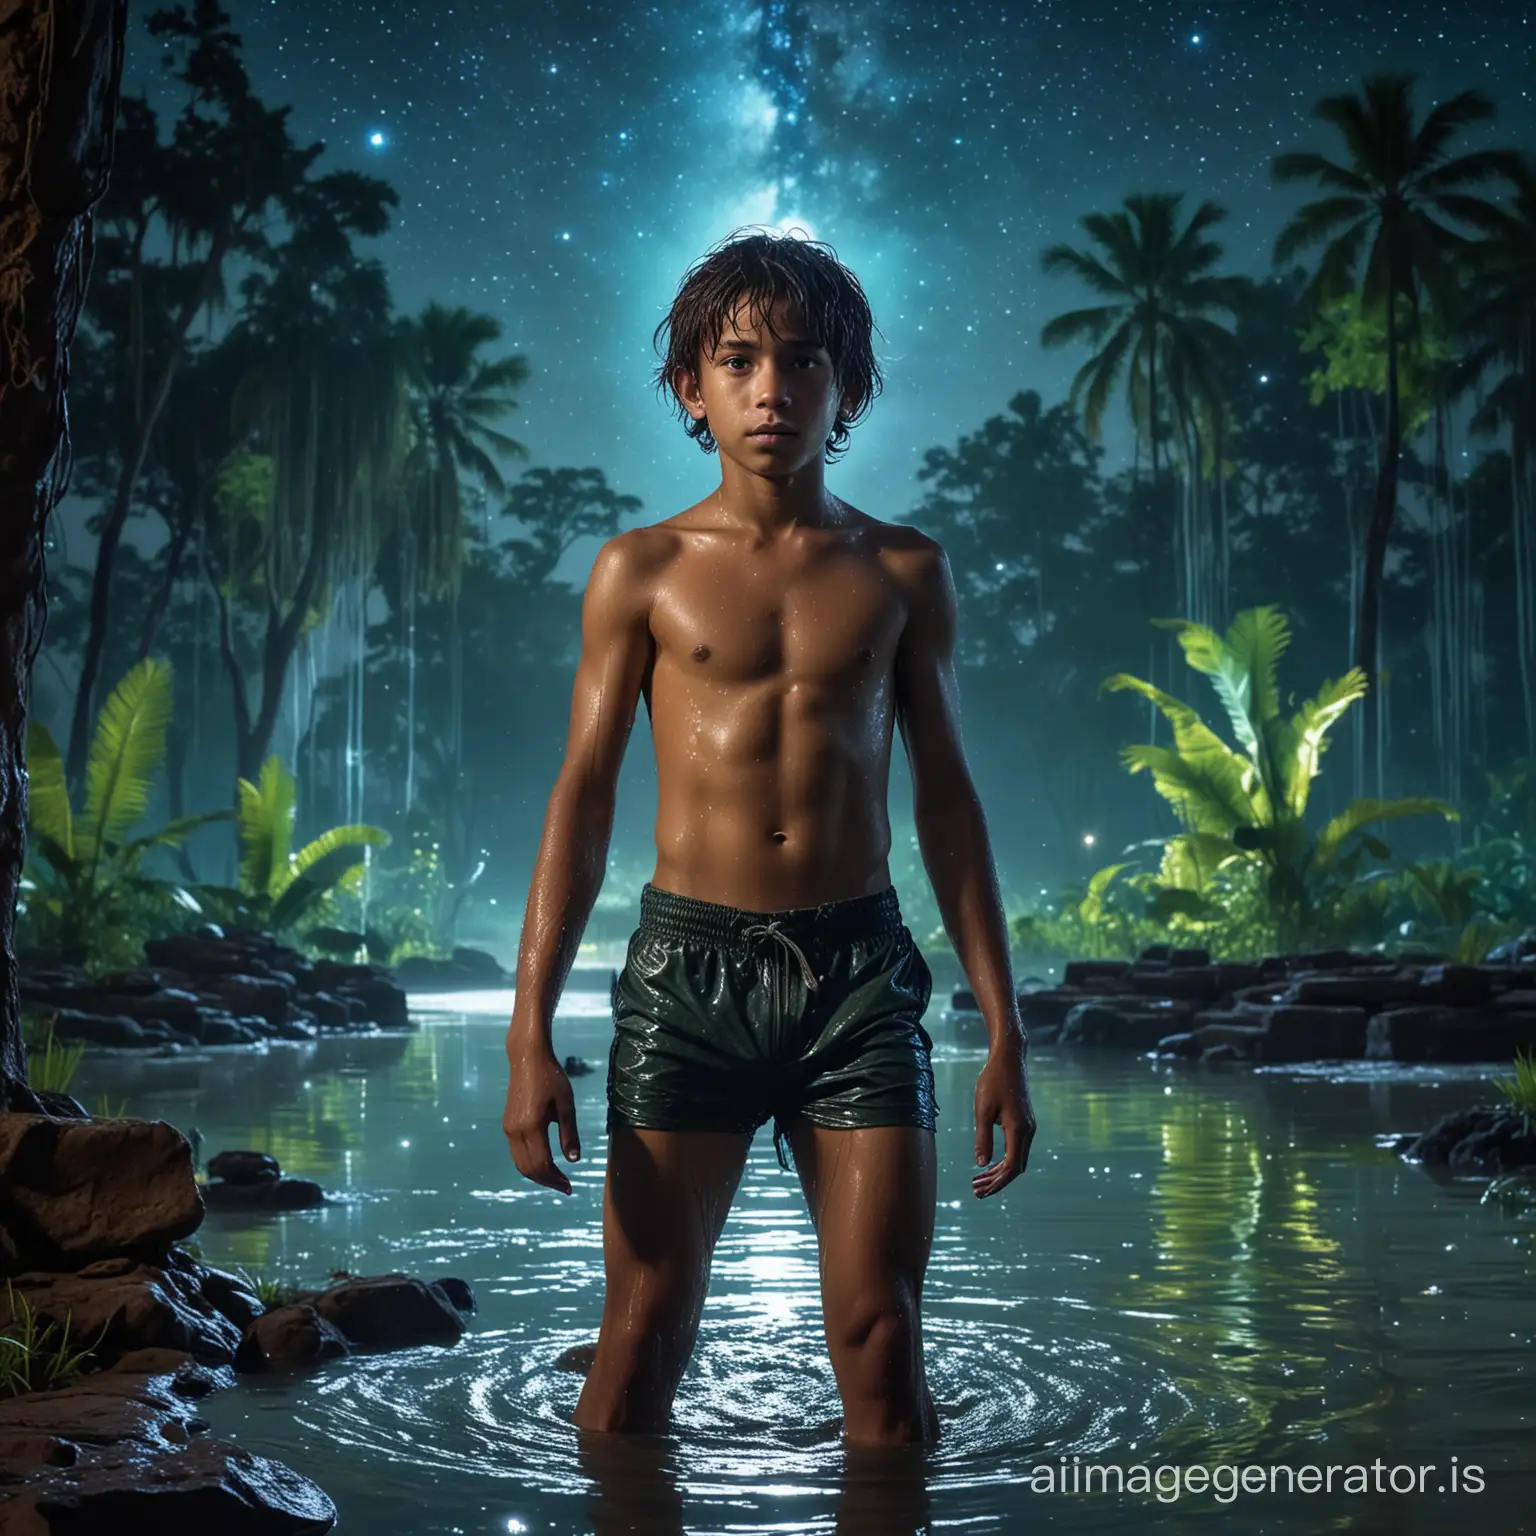 A sexy shirtless muscular sweaty wet Mowgli. The boy must be very athletic and muscled. His feet on the water of an oasis in the ruins of a Cambodian temple in a jungle. At night. With blue and green neon colors ambient. The sky is full of stars with a huge galaxy.